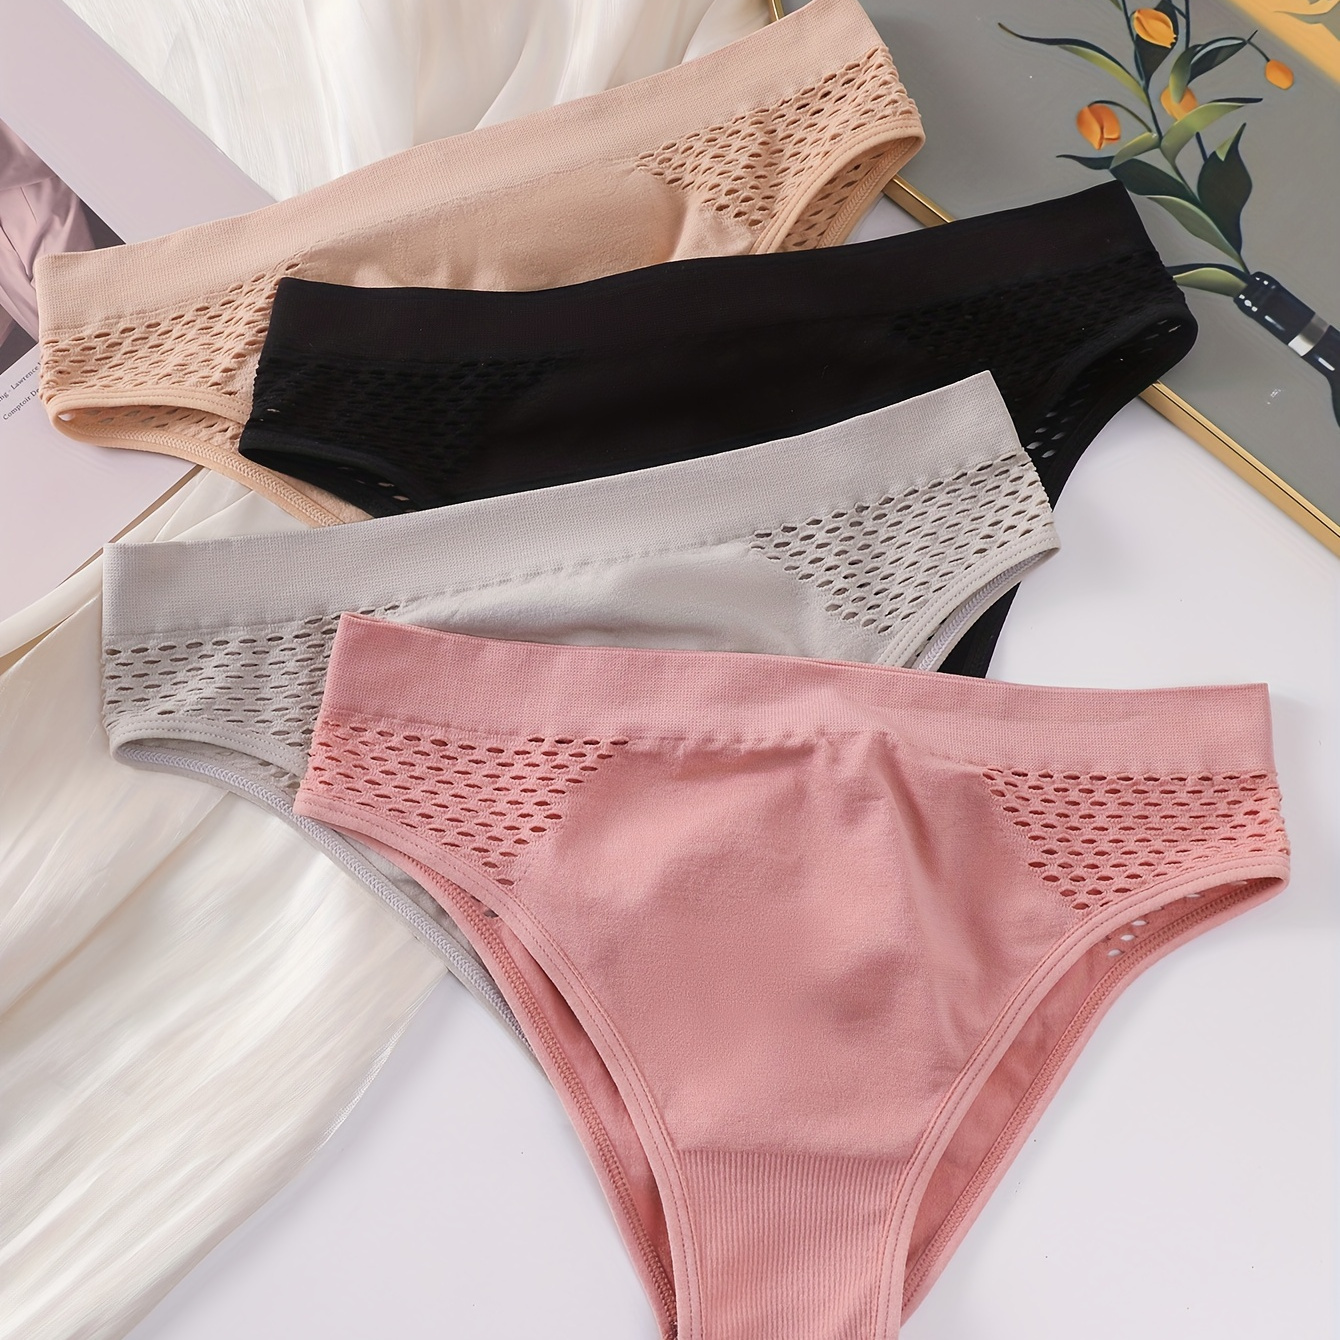 

4pcs Simple Solid Hollow Out Panties, Breathable & Comfy Low Rise Seamless Intimates Panties, Women's Lingerie & Underwear